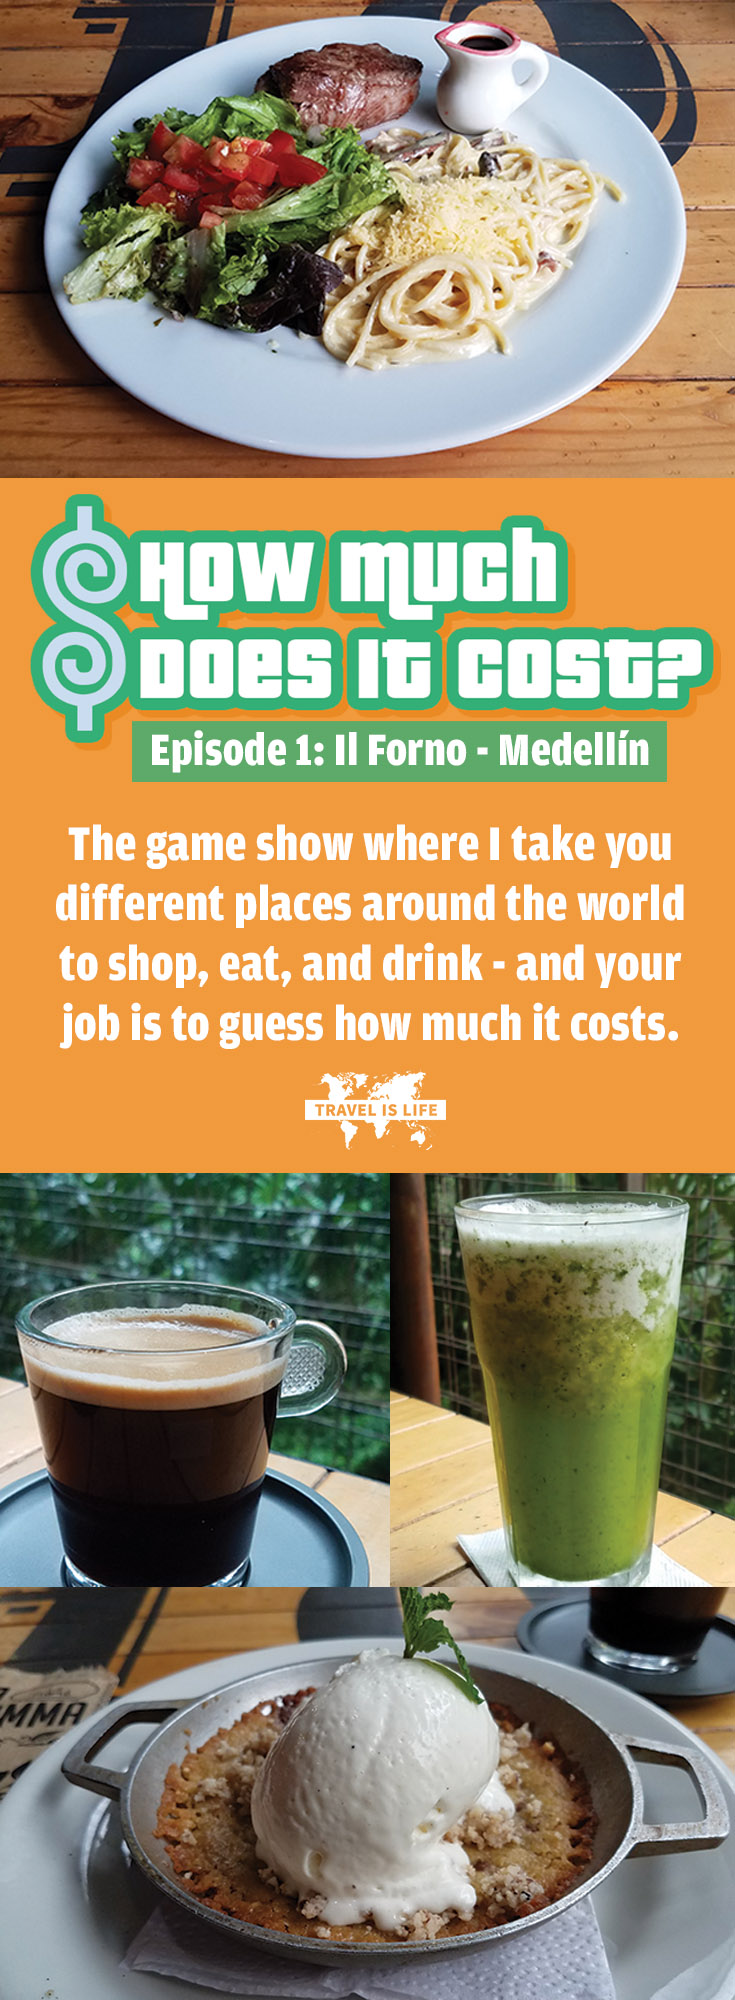 How Much Does It Cost - Episode 1 - Il Forno - Medellin Colombia